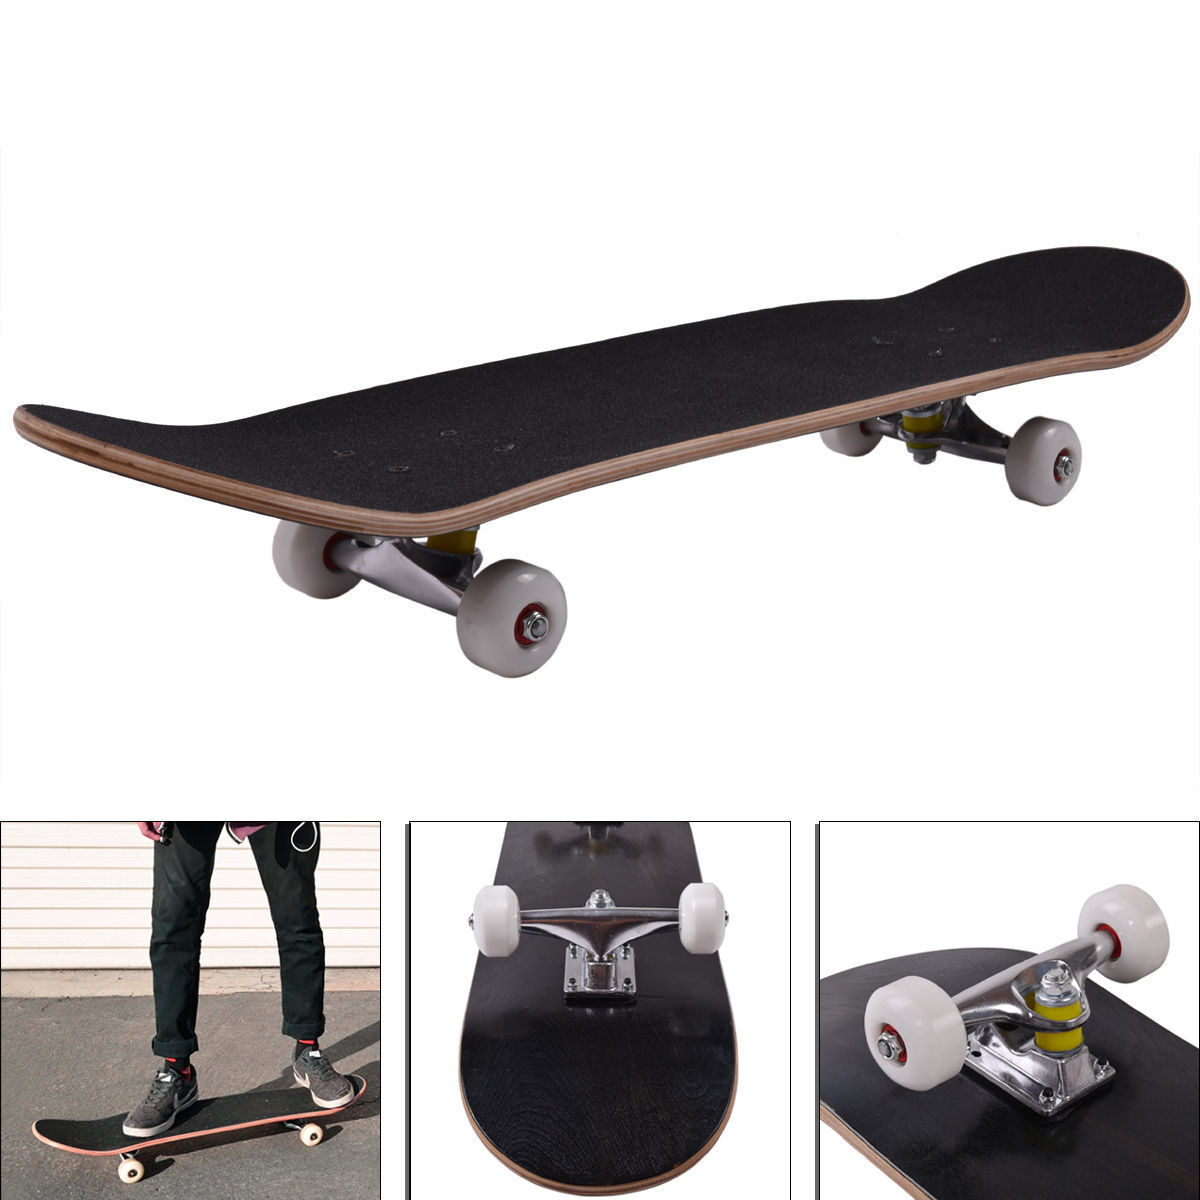 Blank Complete Skateboard Stained BLACK 7.75" Skateboards, Ready to ride New